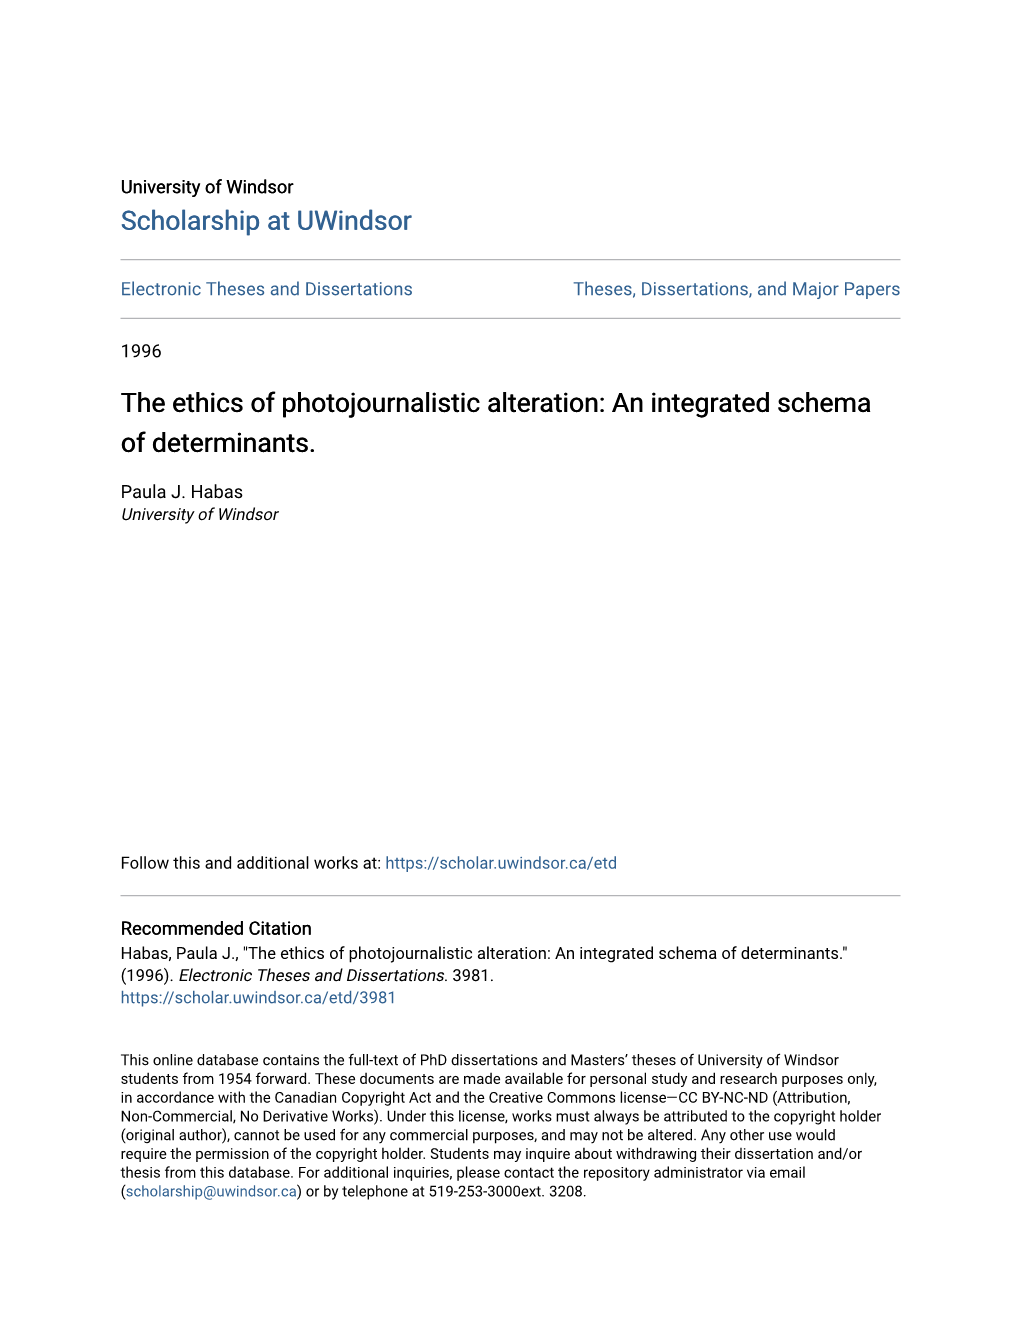 The Ethics of Photojournalistic Alteration: an Integrated Schema of Determinants